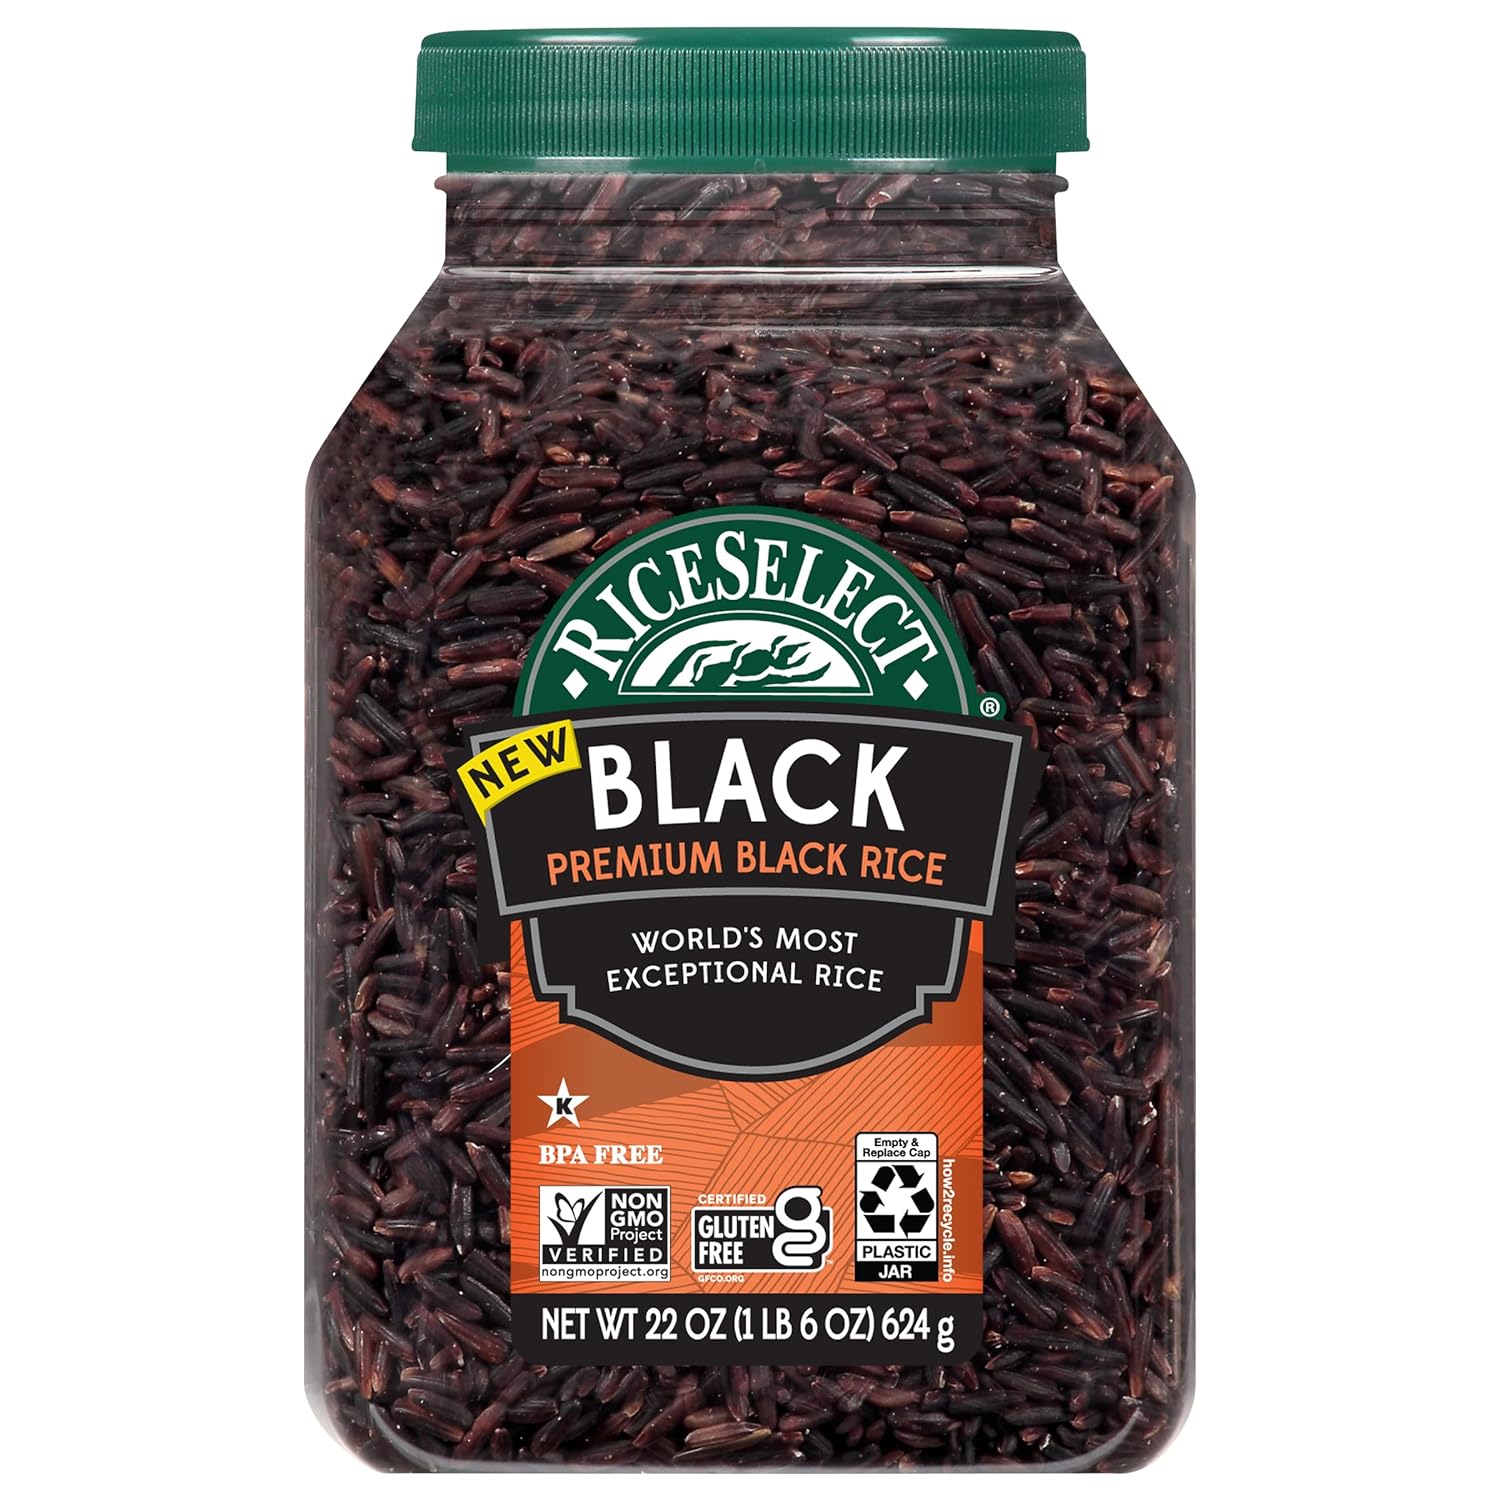 A friend recommended this and now I am recommending the black rice.  Very flavorful with a nutty taste.  Black/red rice 🍚 supposed to be healthy too.  Although expensive, it is worth it to upgrade a meal occassionally